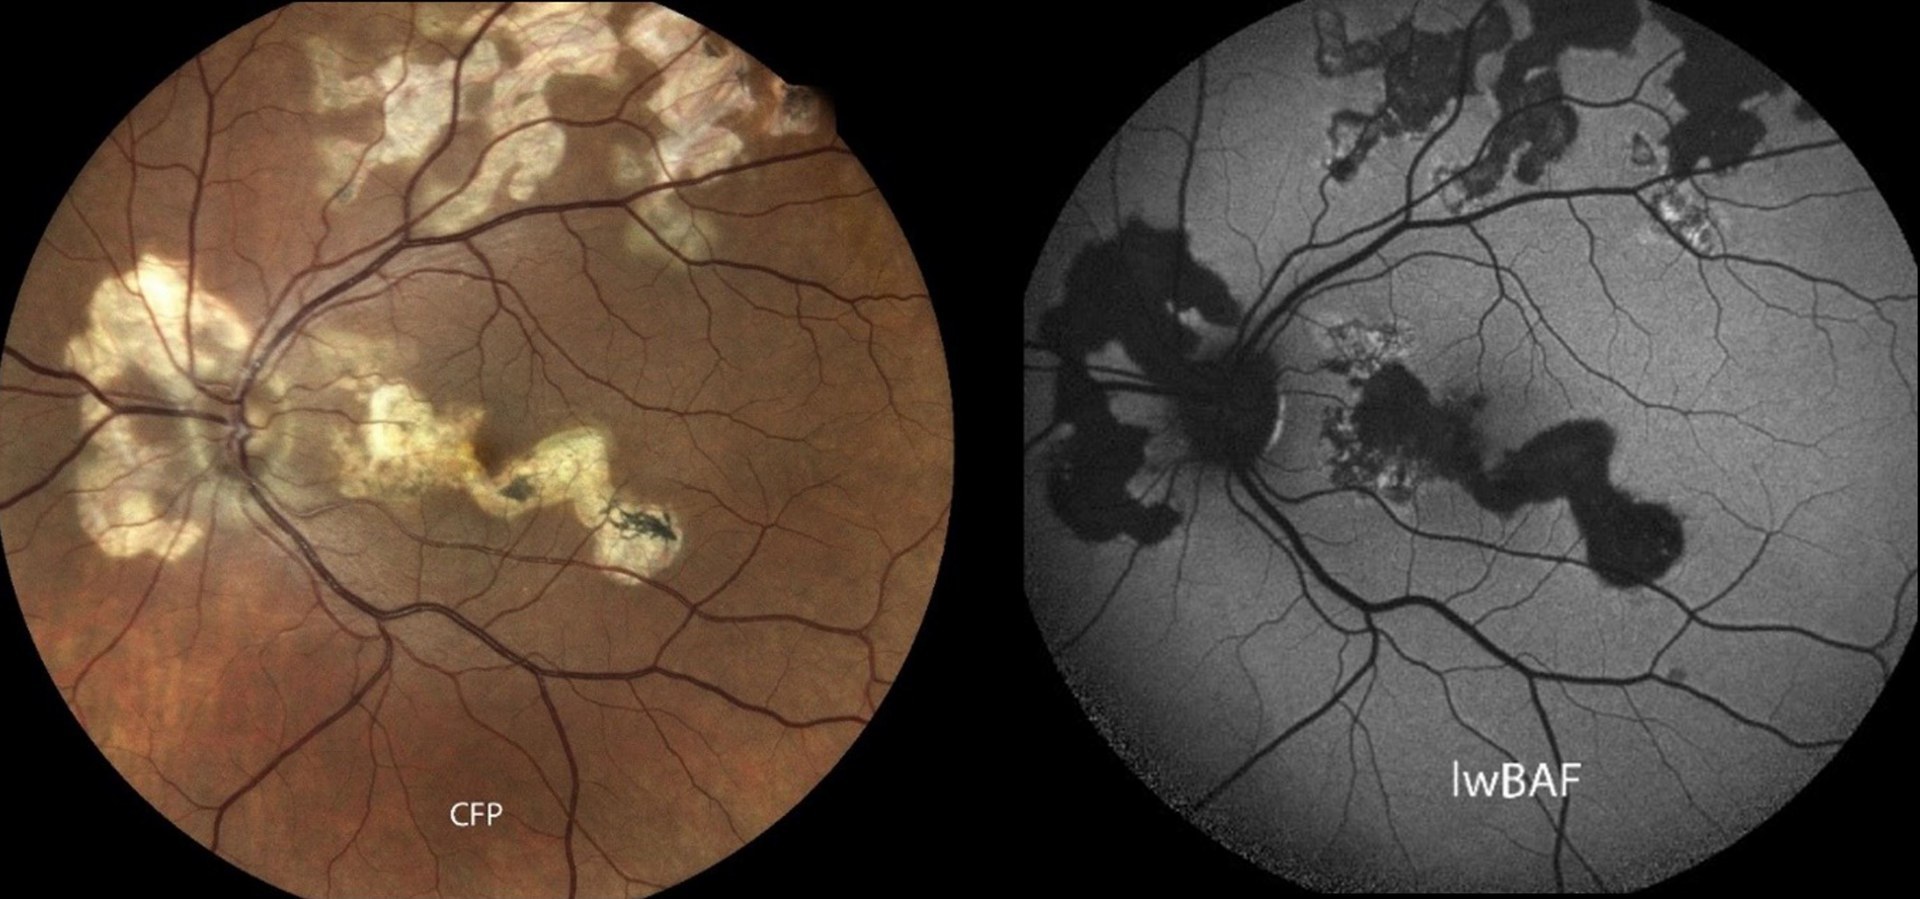 The picture shows an eye affected by the rare serpiginous chorioretinopathy. - The name comes from the "snake-like" spread of the disease across the retina. The ocular fundus photograph (left) shows areas of scarring in a light yellow tone. Active inflammatory lesions usually appear as light-colored areas on fundus autofluorescence (right).